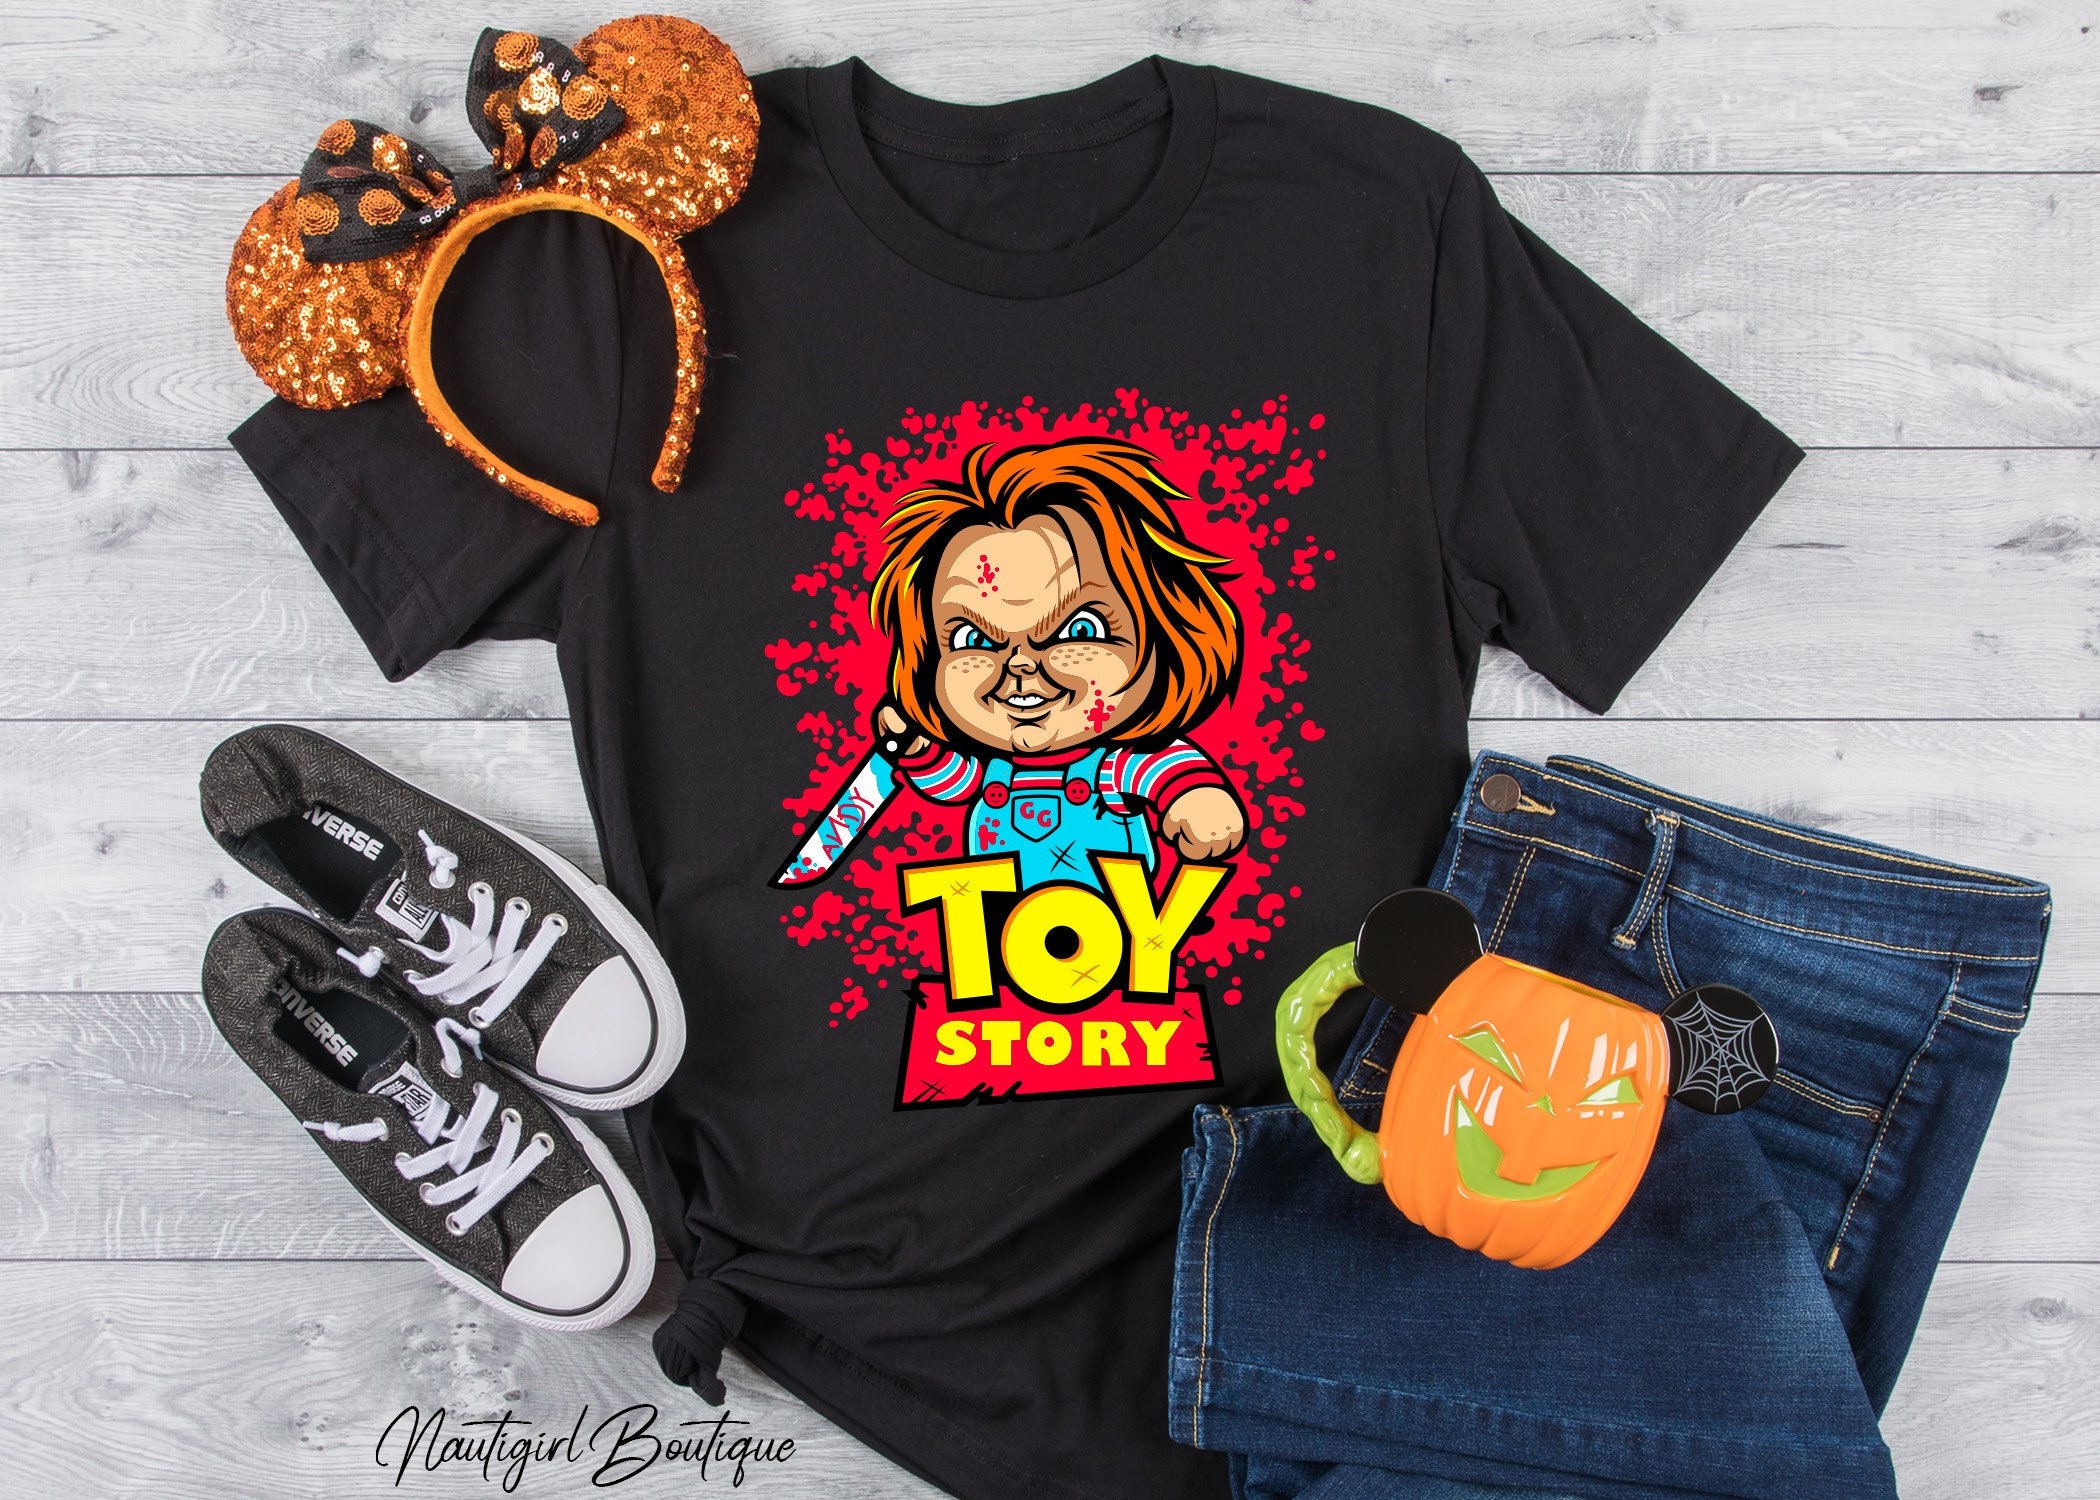 Toy Story Chucky Funny T-Shirt Childs Play Movie Tee Mens All Sizes Birthday ... 